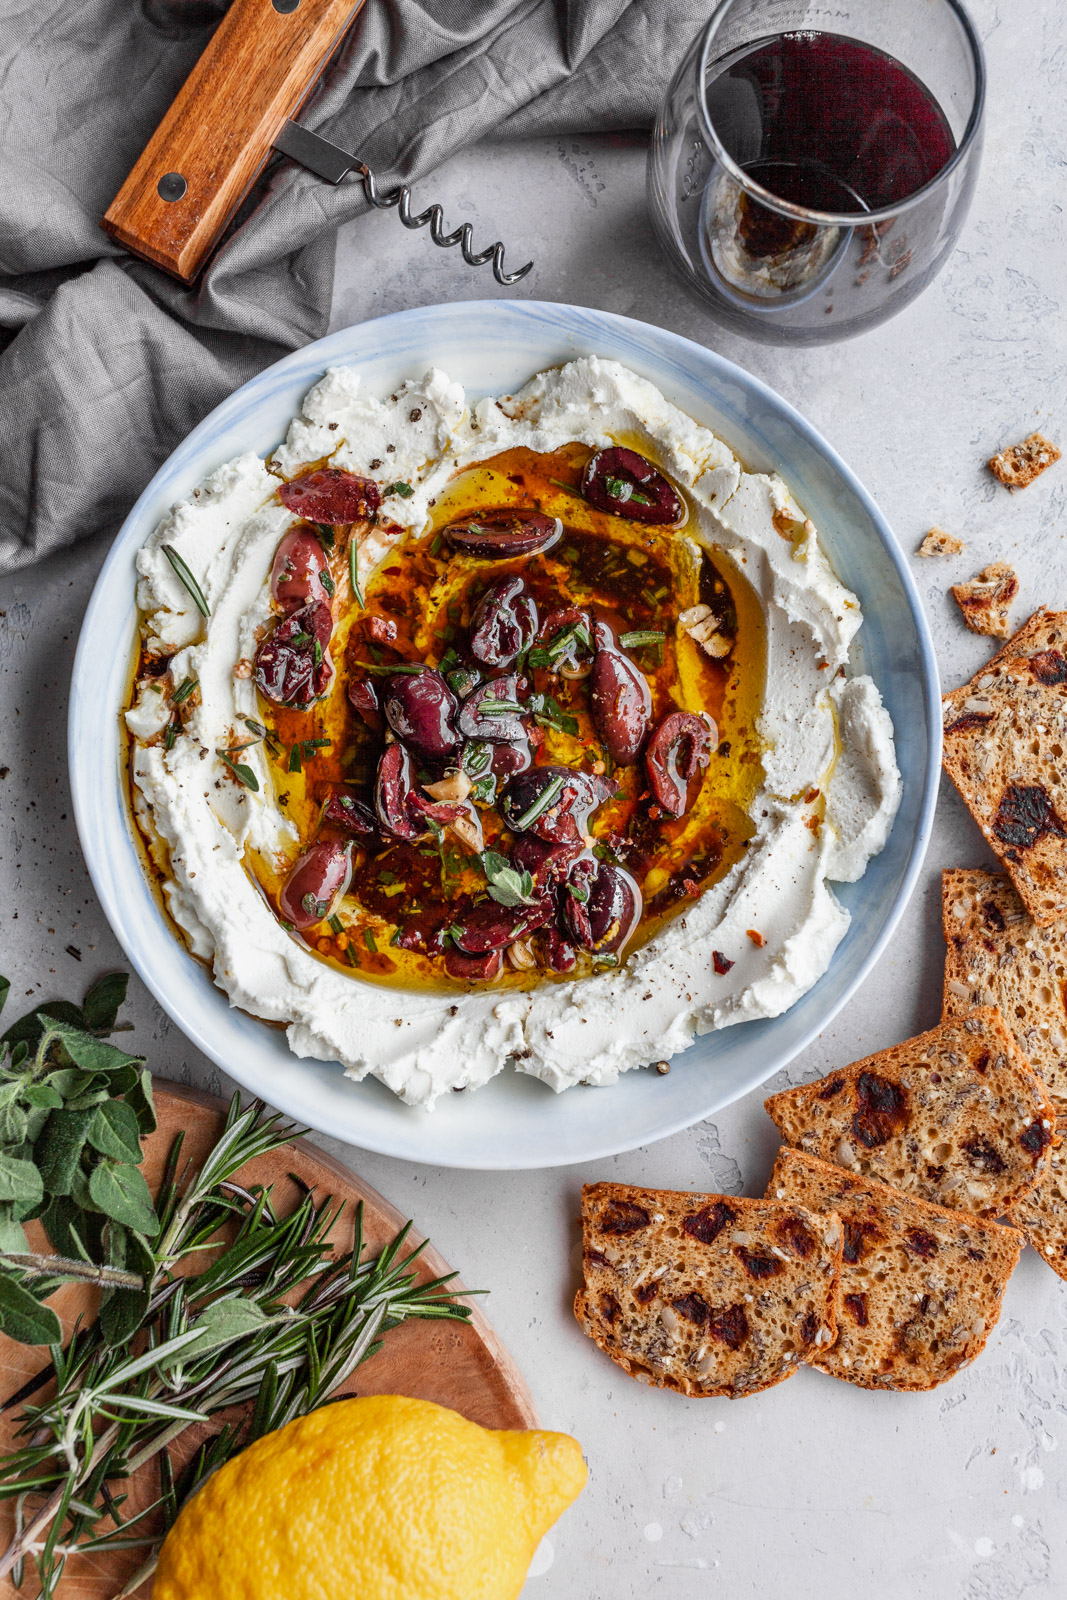 Marinated Goat Cheese Spread